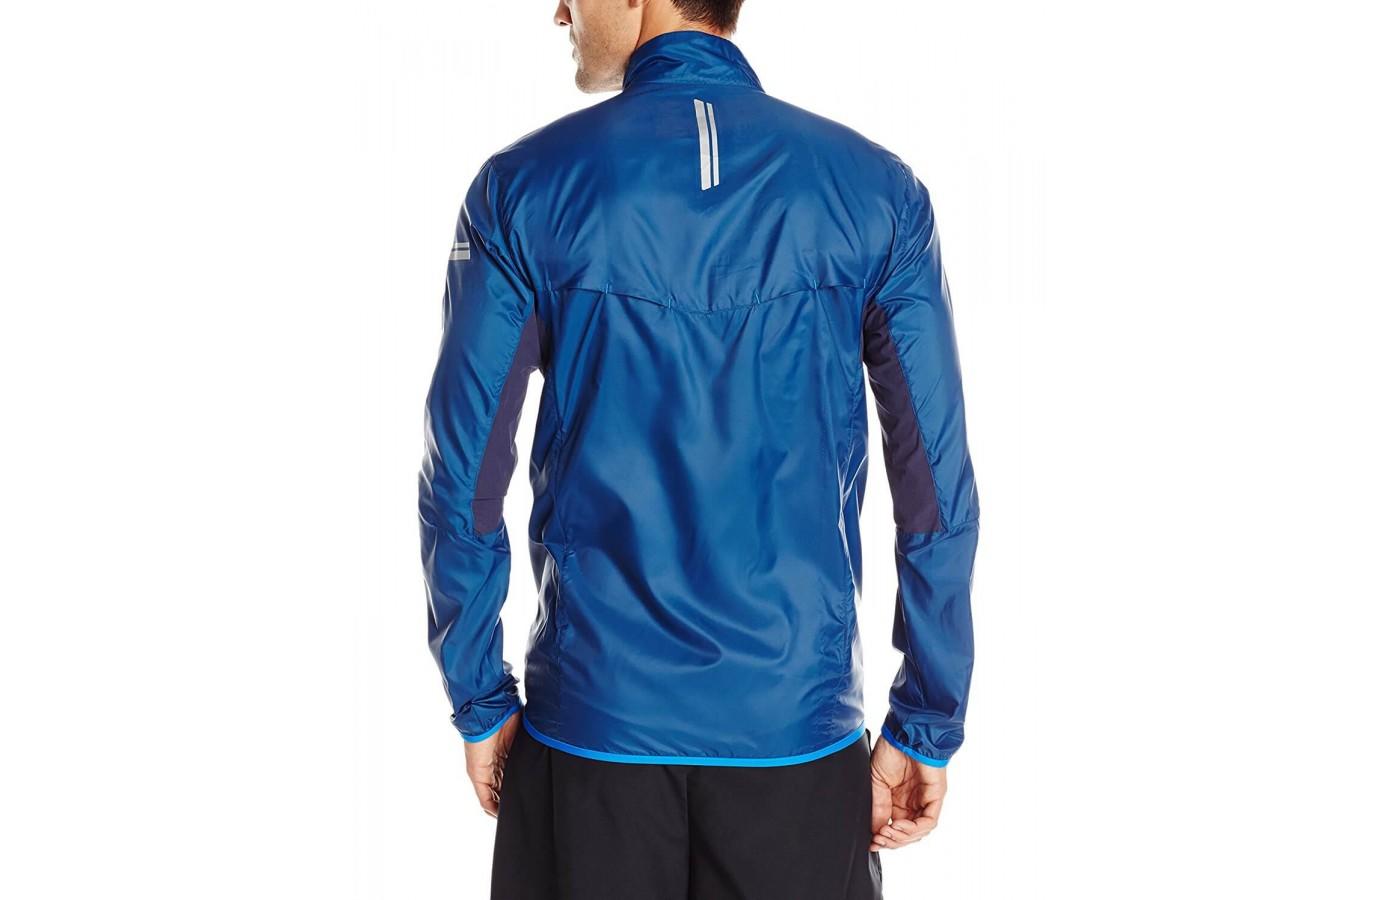 An In Depth Review of the Salomon Agility Jacket